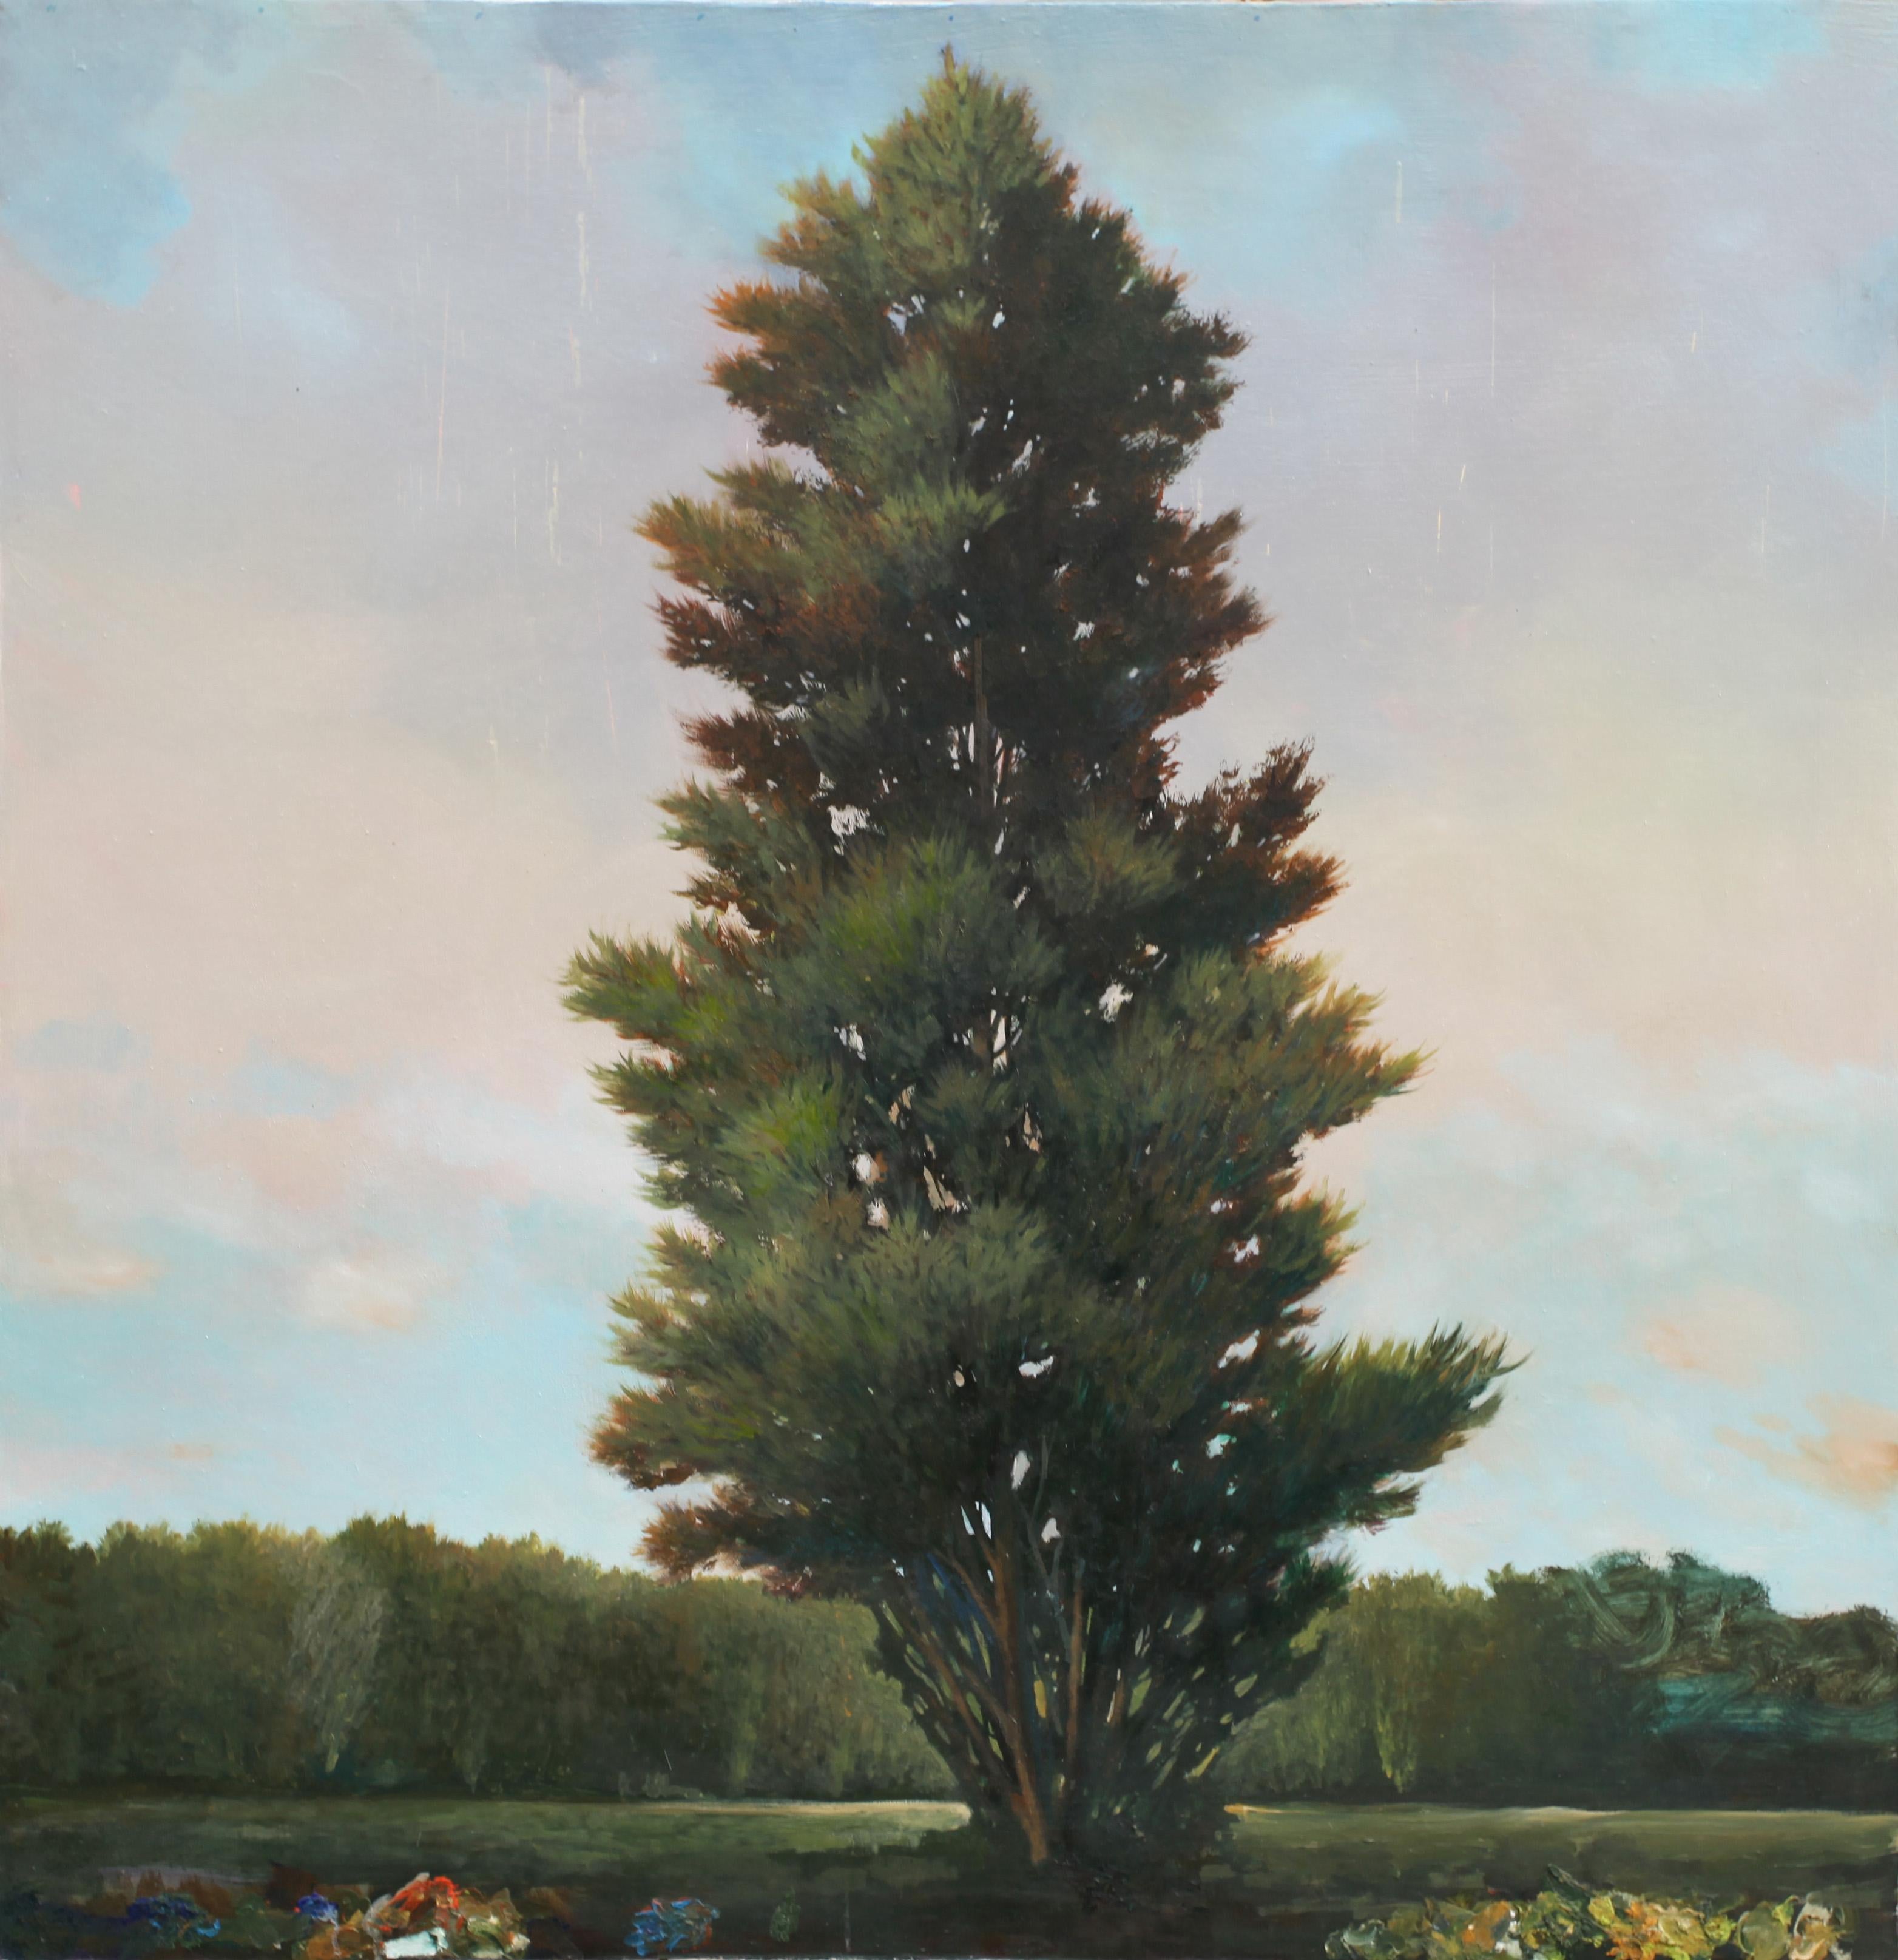 Peter Hoffer
St. Laurent, 2017
oil on canvas
55 x 55 in.
(hoff169)

This original oil painting by Peter Hoffer depicts a large tree in a field, centered on the canvas, rendered in lush green tones and set against a serene blue sky with pink and